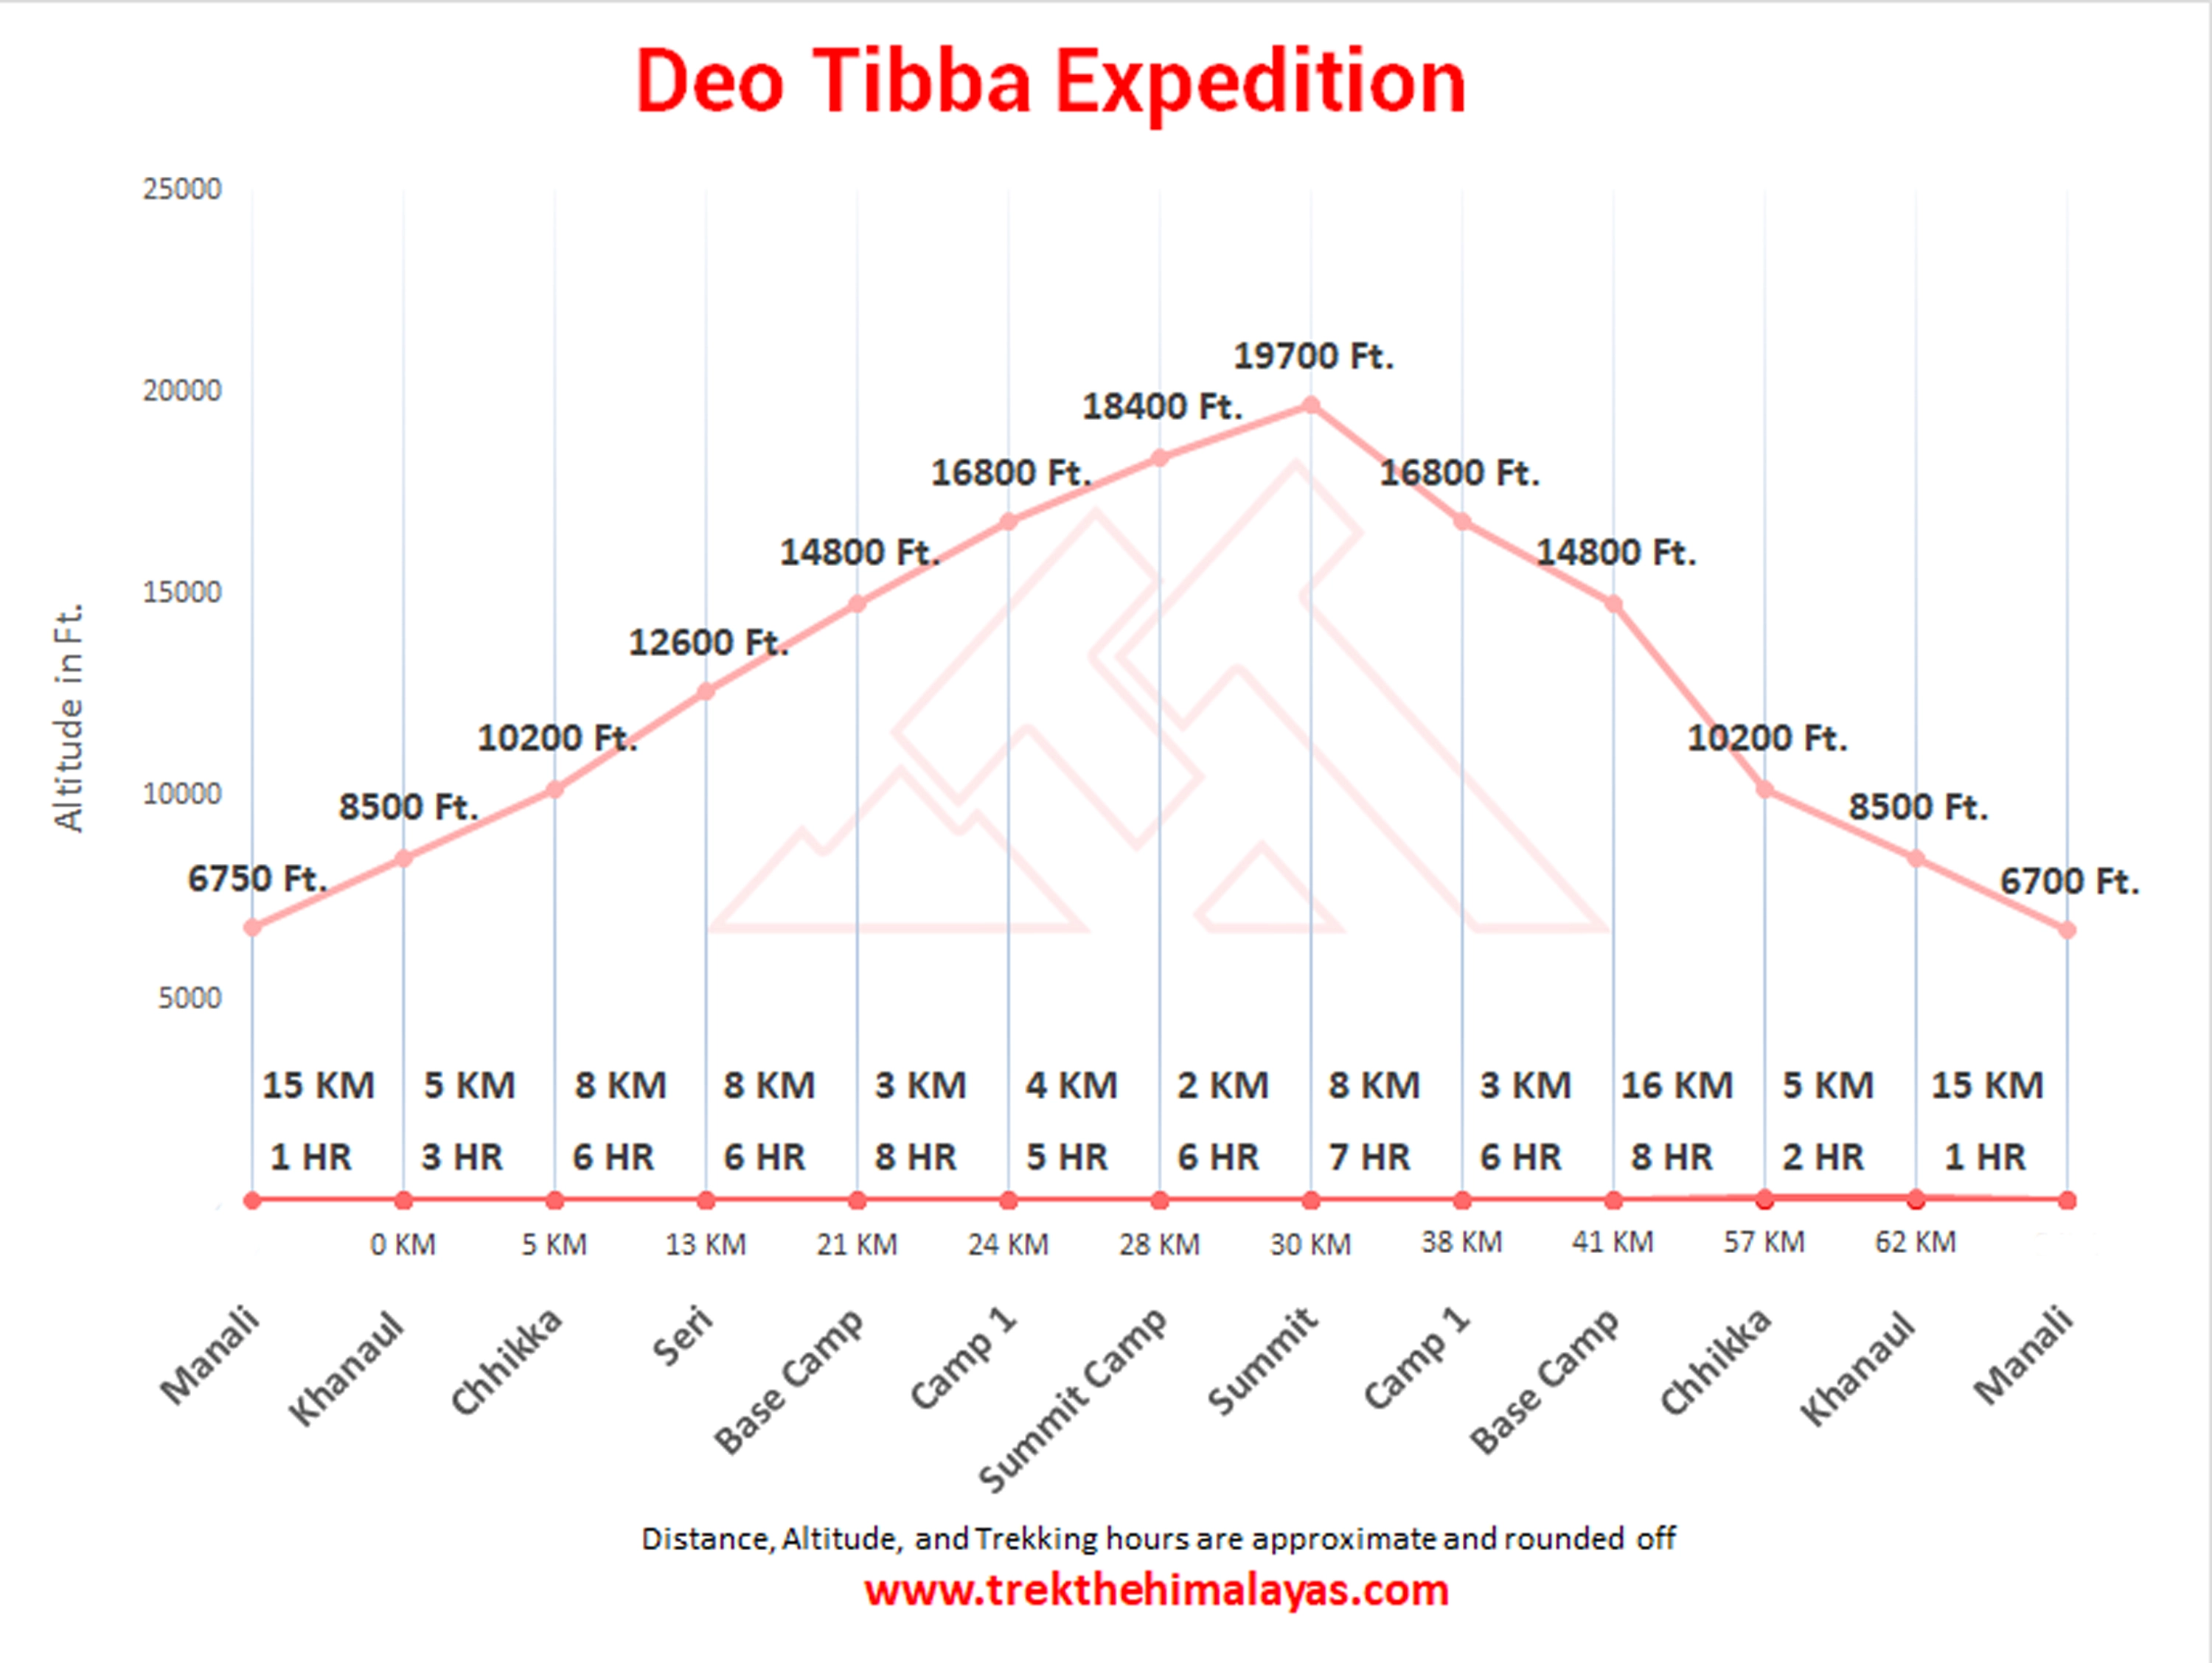 Deo Tibba Peak Expedition Maps